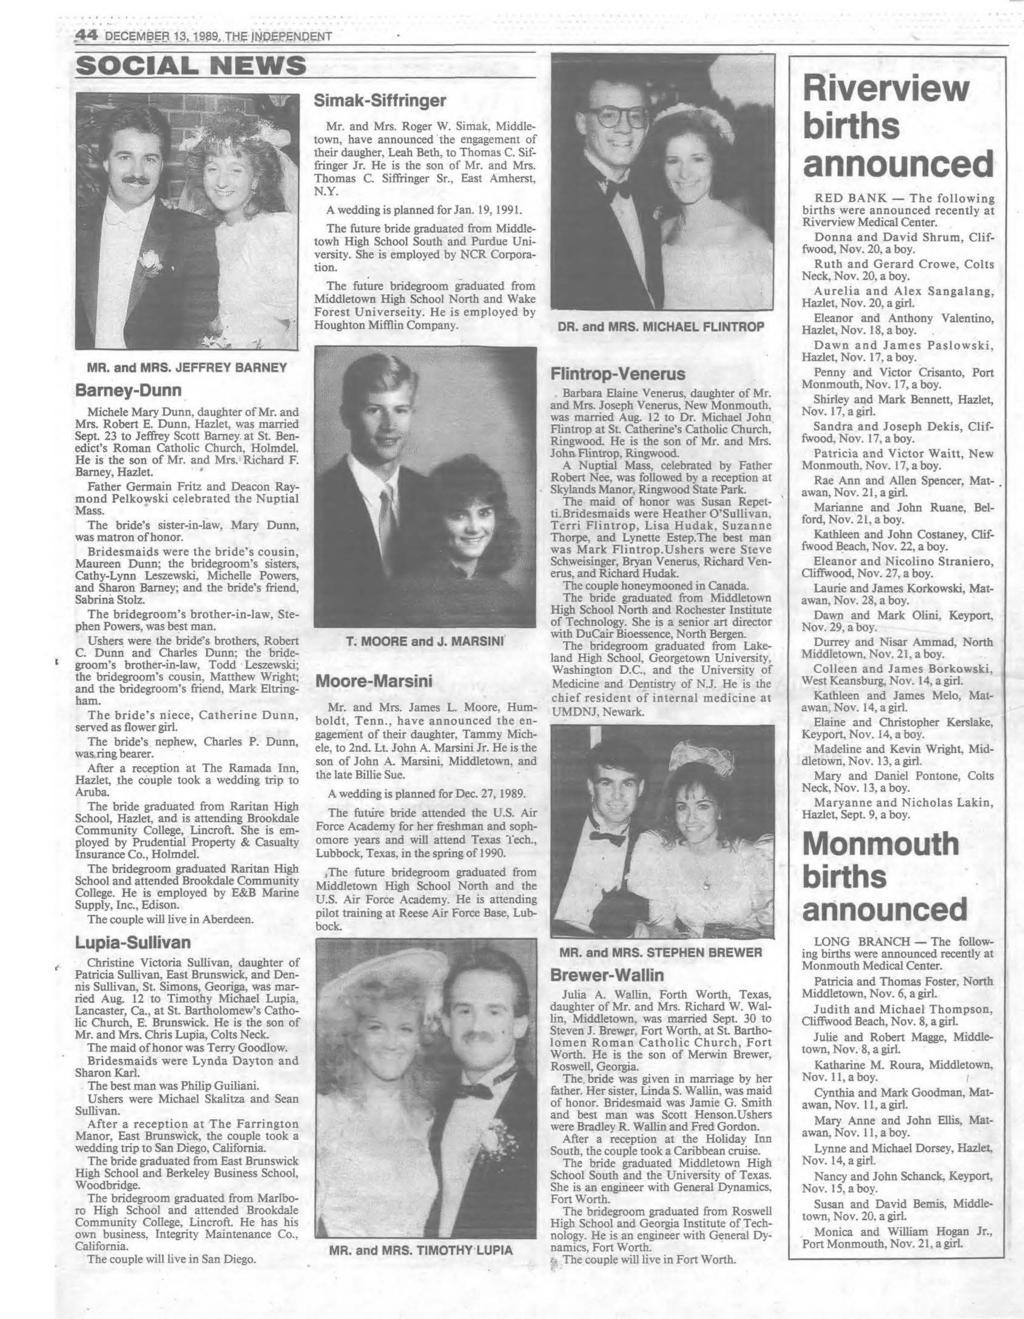 4 4 DECEM BER 13,1989, THE INDEPENDENT S O C IA L N E W S MR. and MRS. JEFFREY BARNEY Barney-Dunn Michele Mary Dunn, daughter of Mr. and Mrs. Robert E. Dunn, Hazlet, was married Sept.